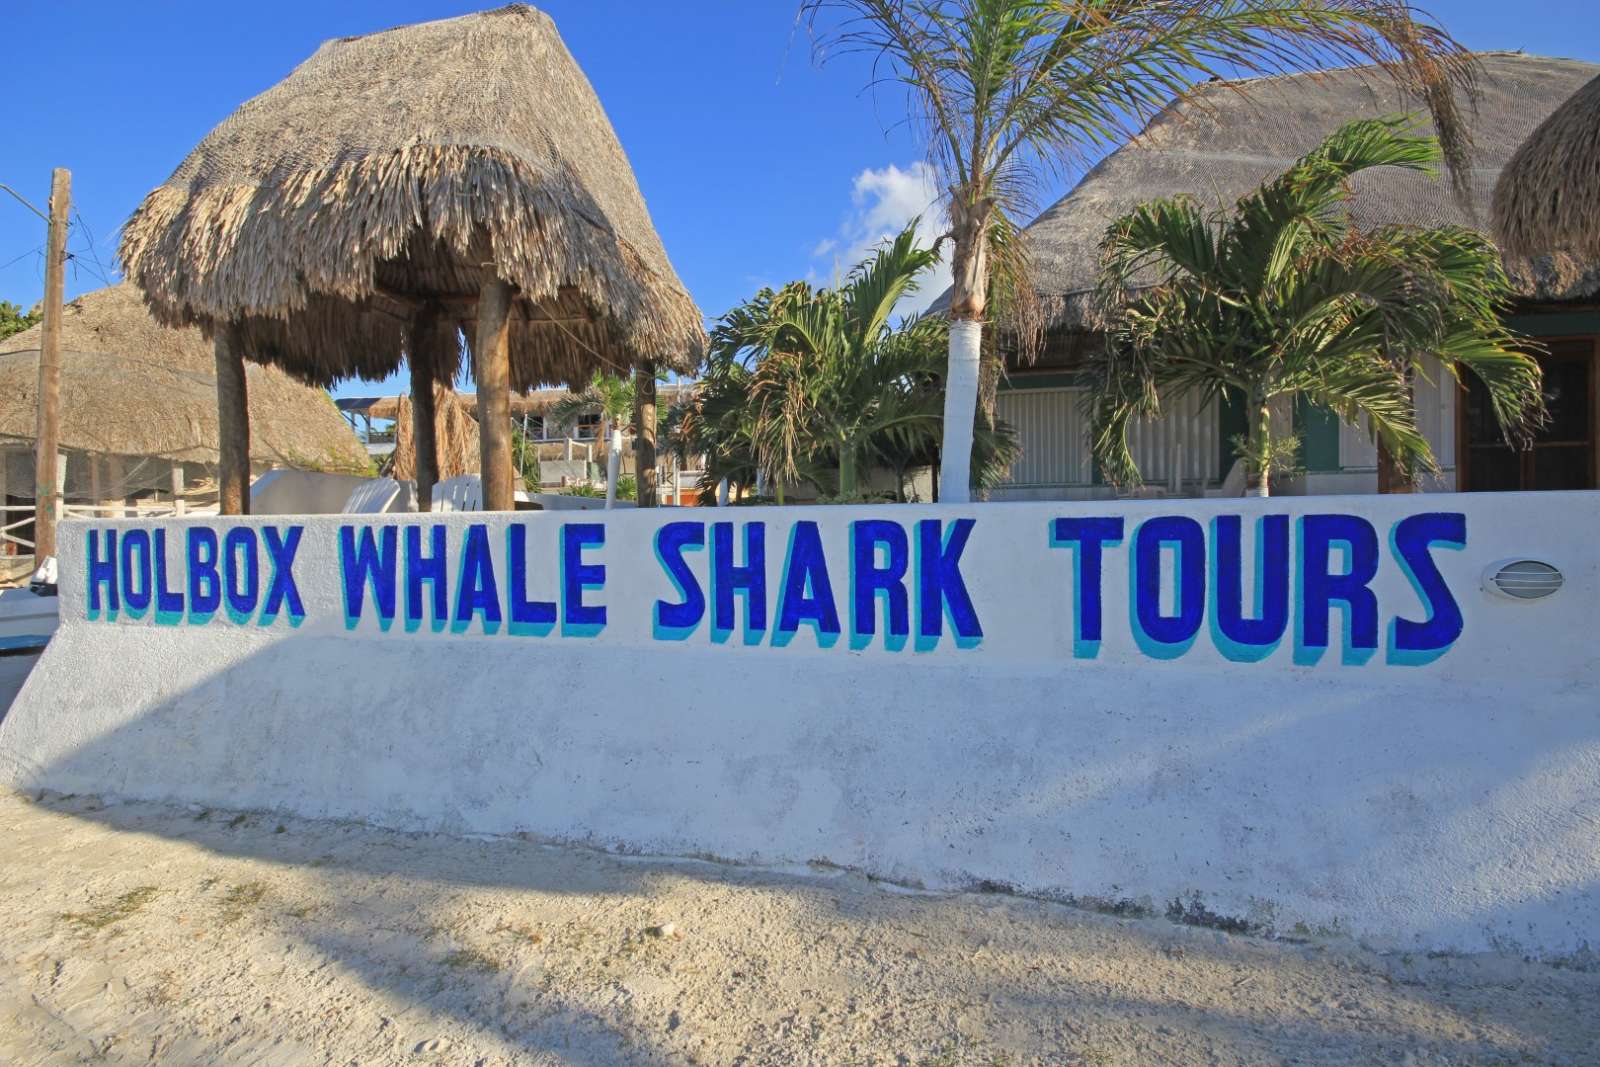 Whale Shark Tours on Holbox, Mexico